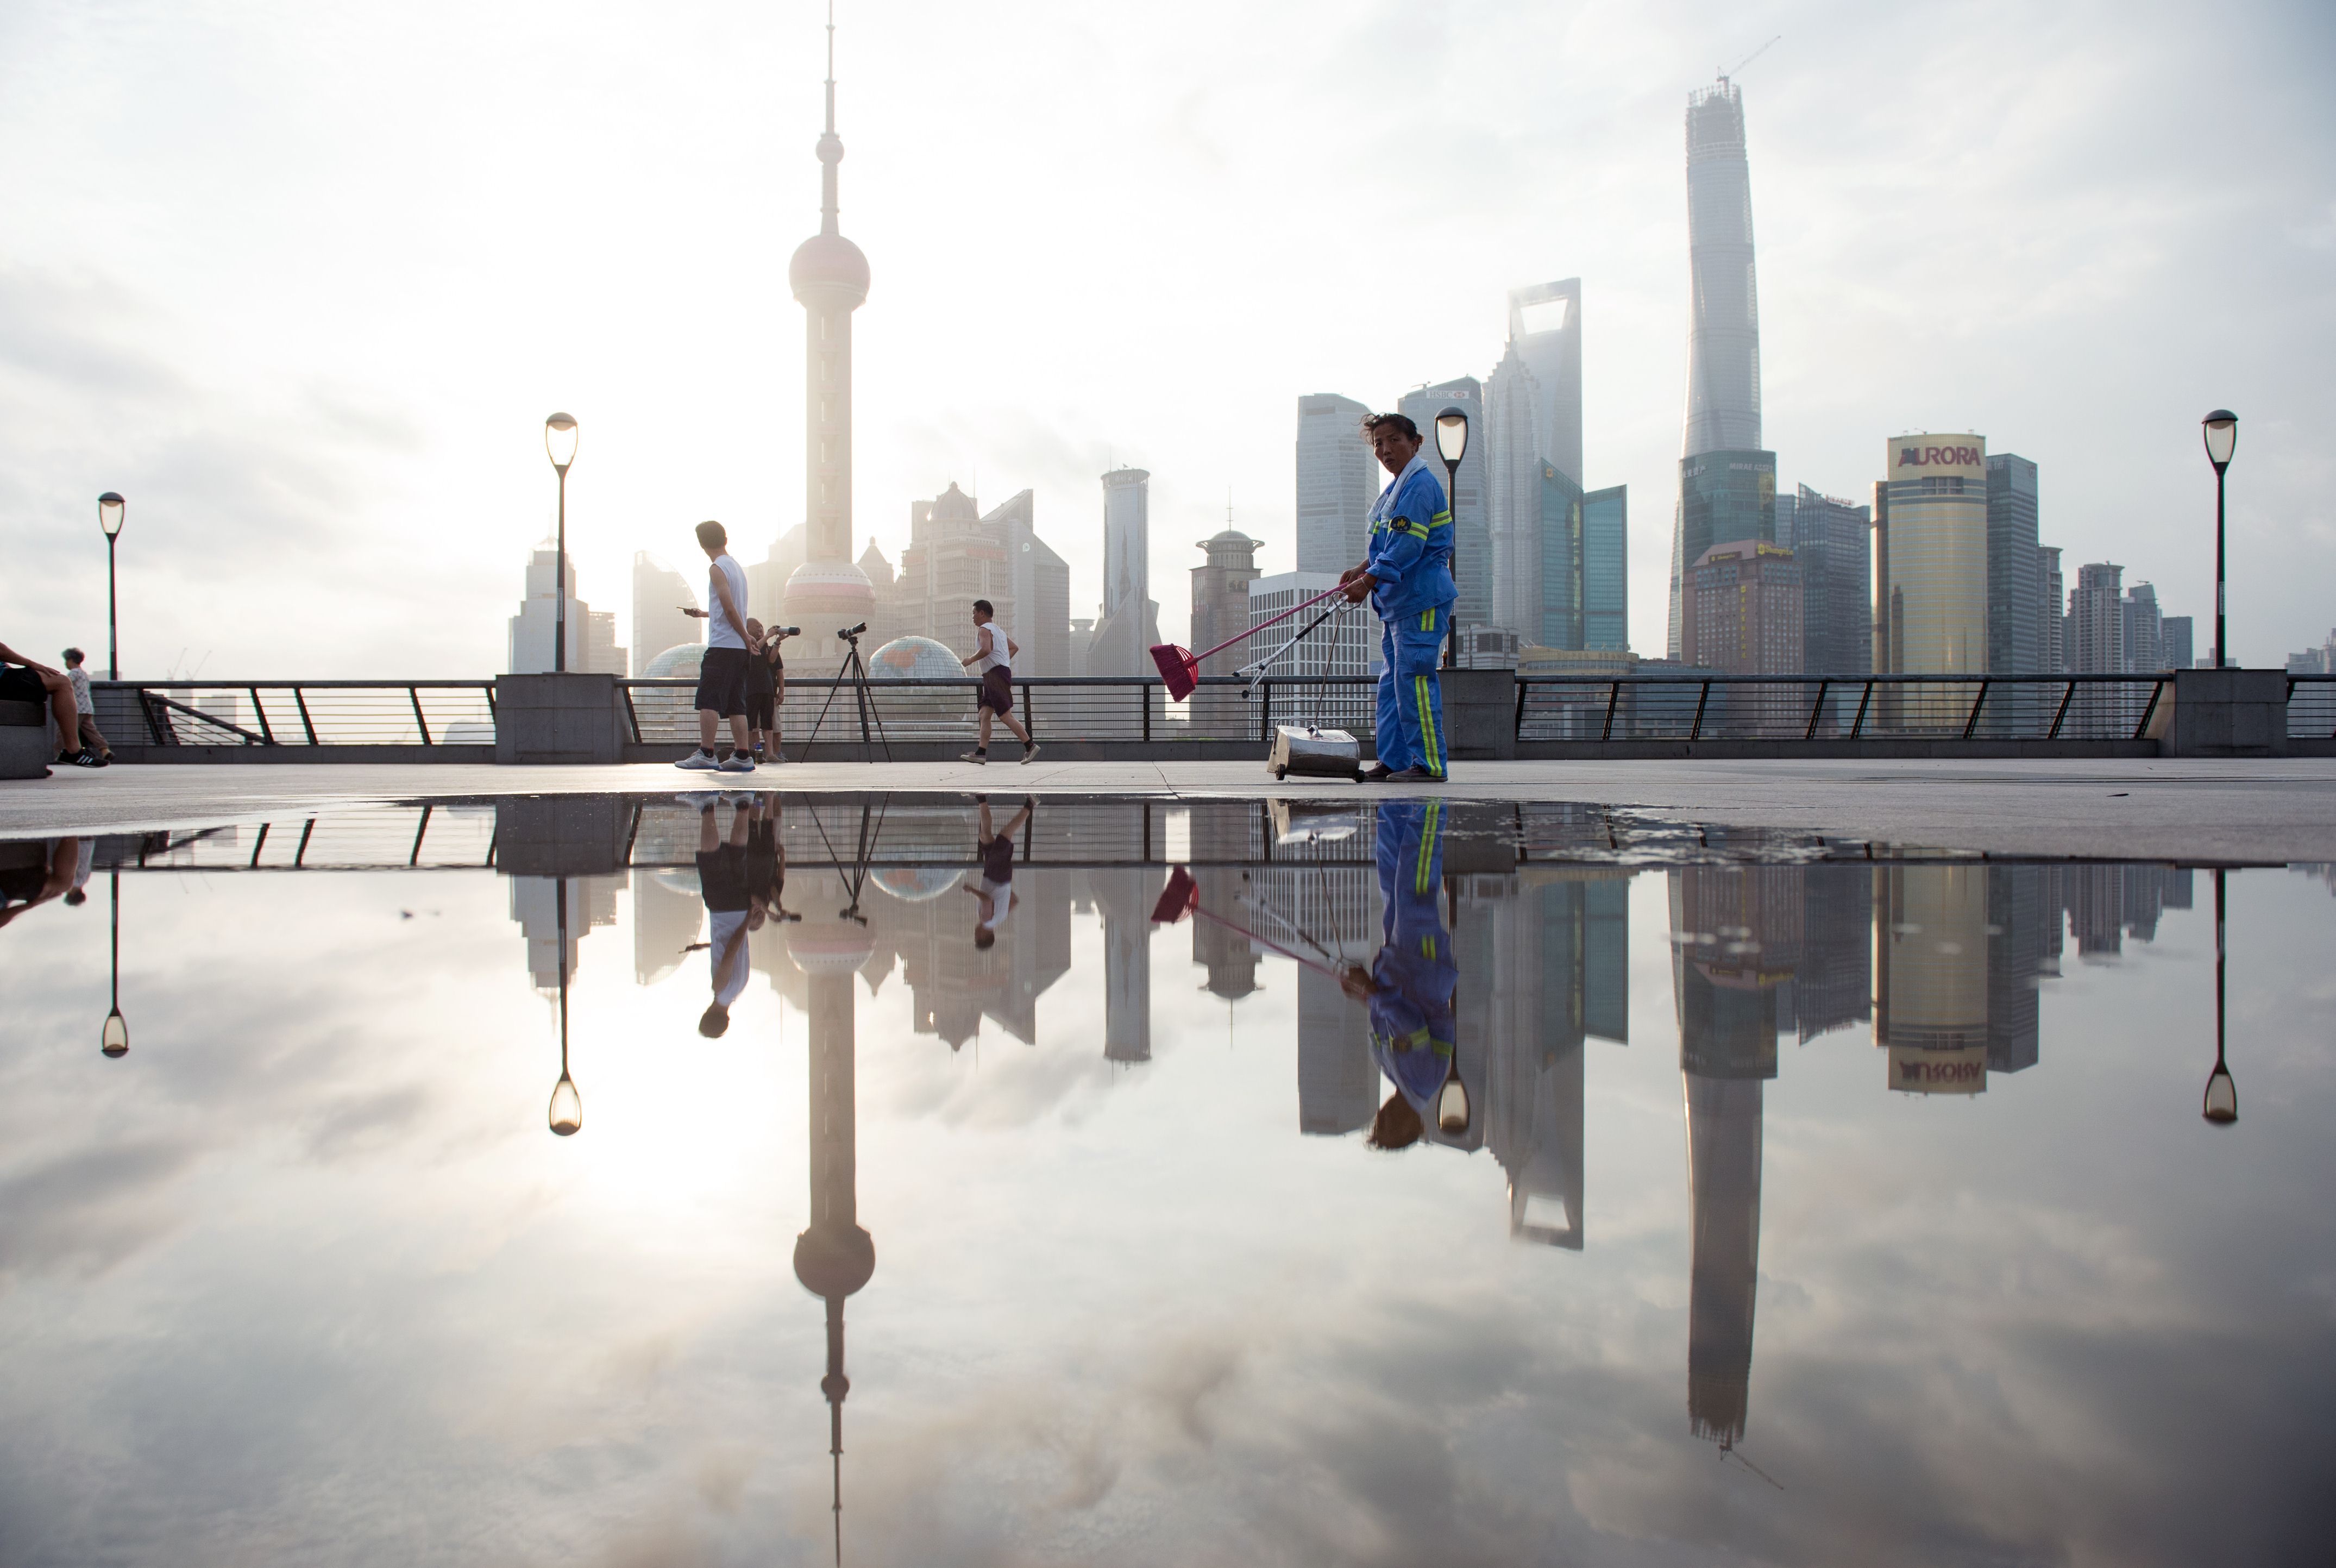 Shanghai is the single largest focal point for overseas investment in real estate in China. Photo: AFP